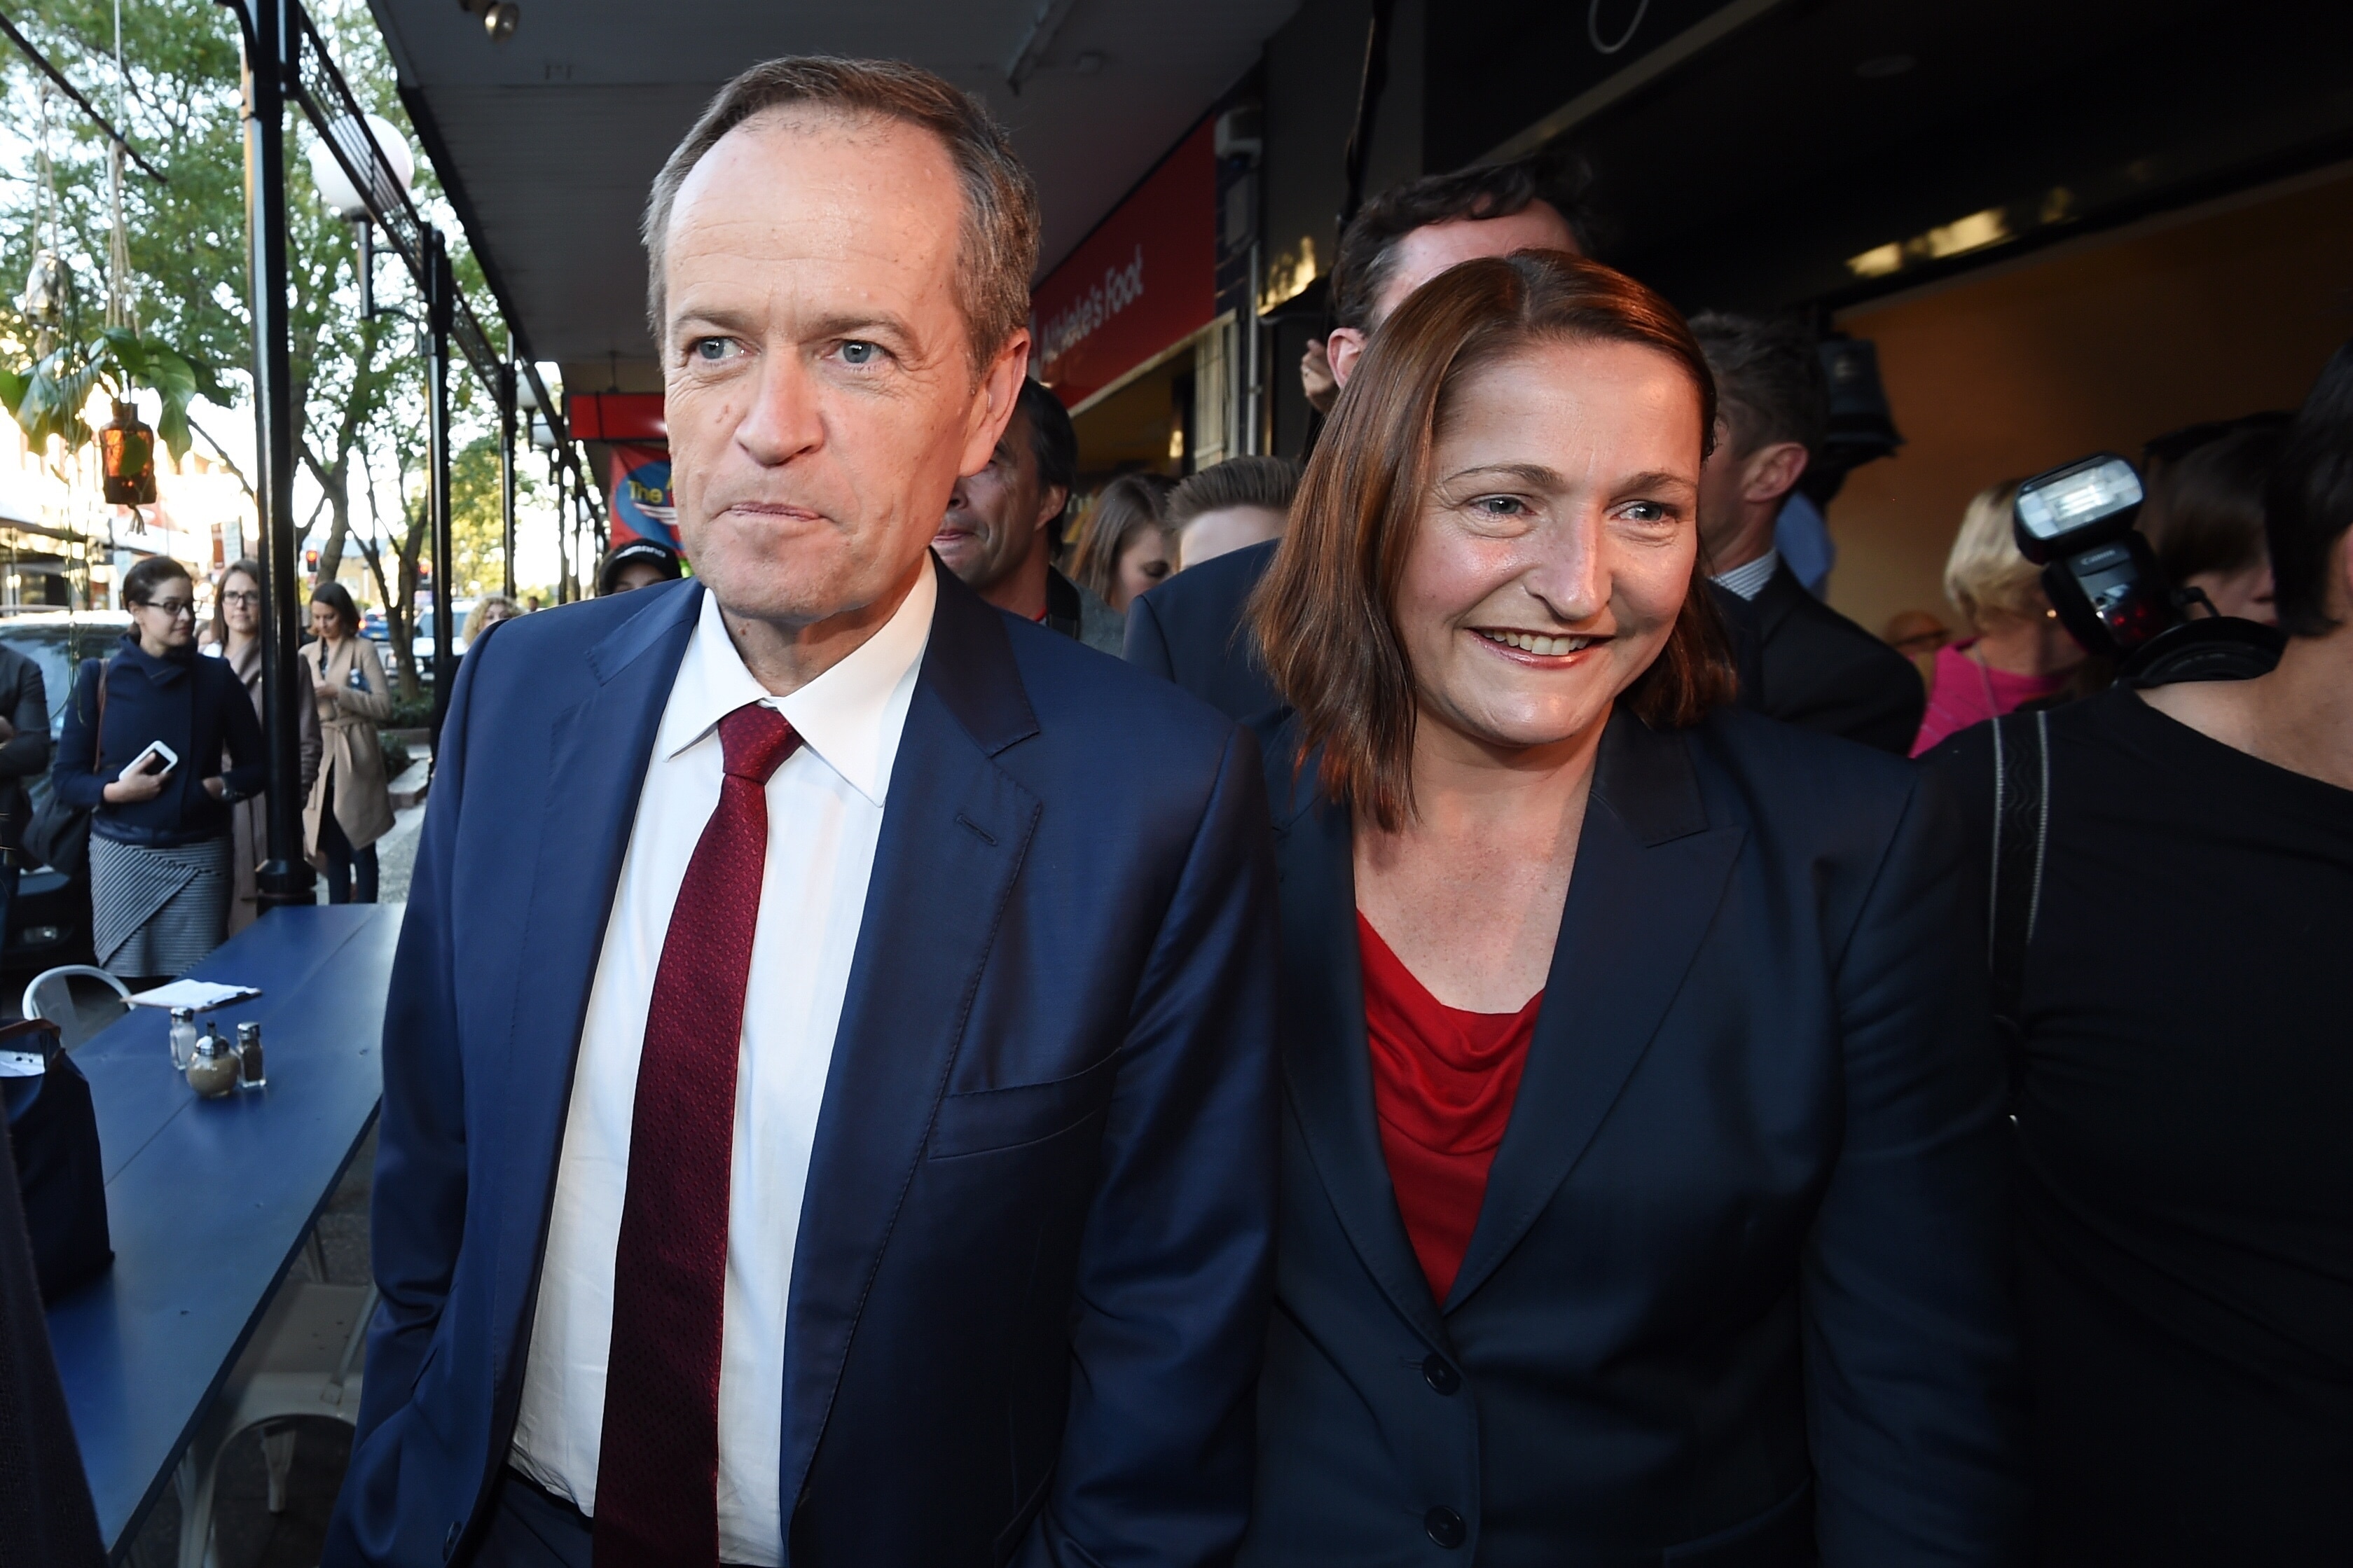 Fiona Phillips with former Labor leader Bill Shorten on the 2019 election campaign.